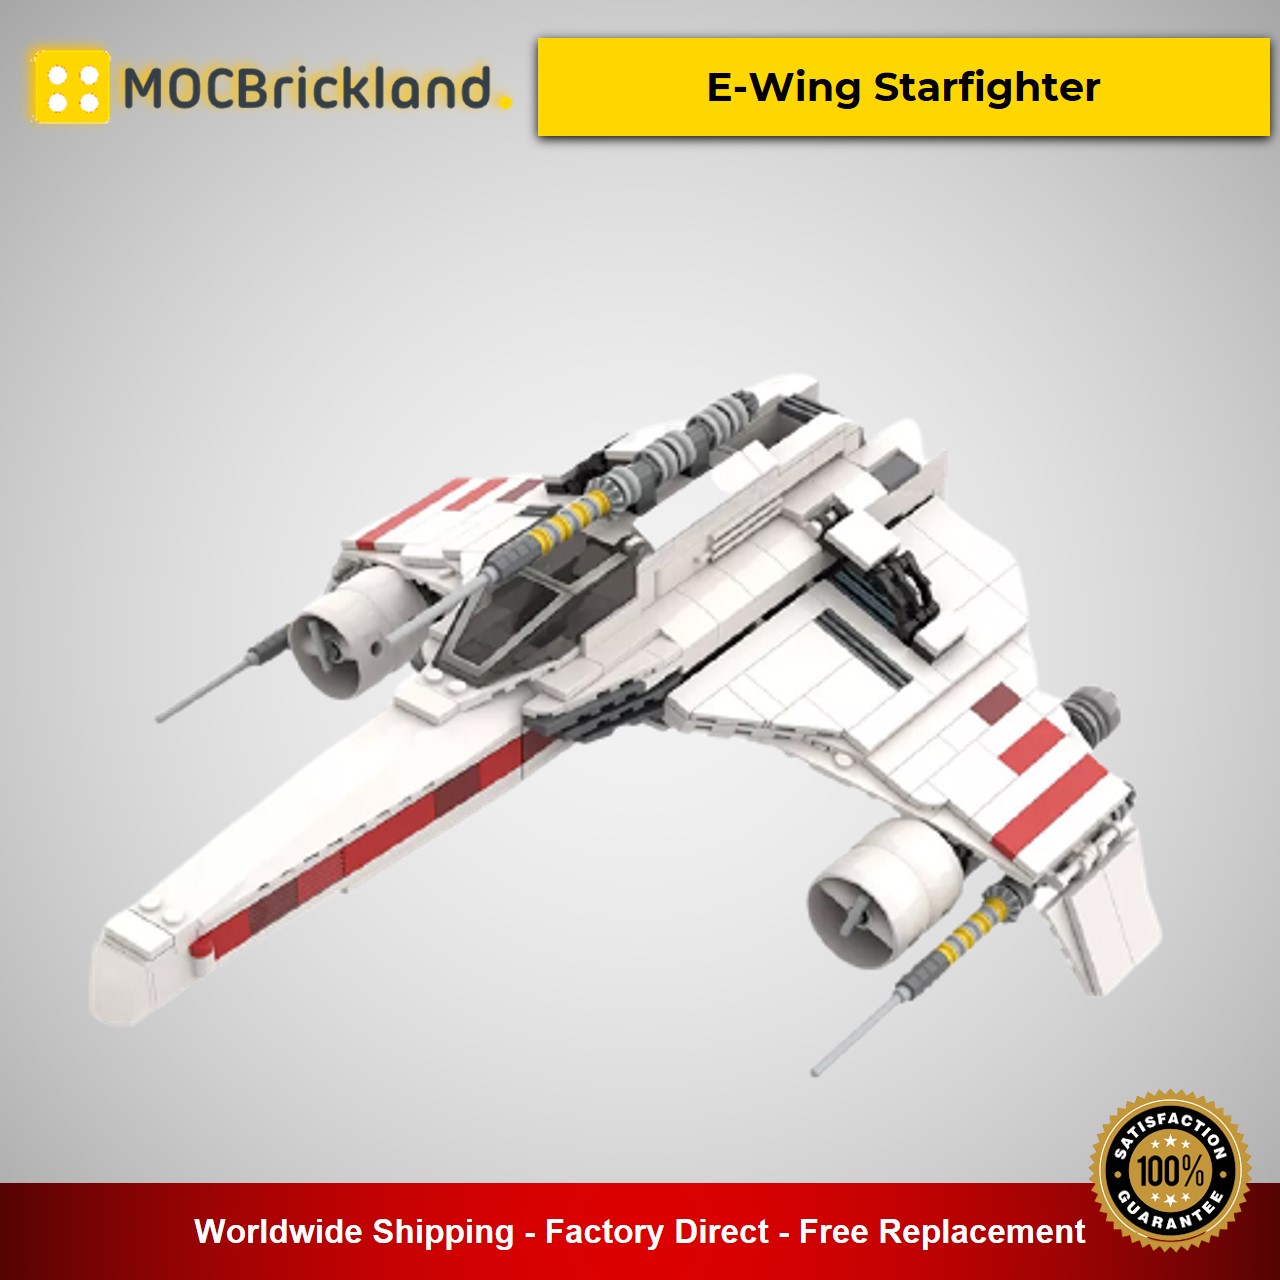 MOC-50114 Star Wars E-Wing Starfighter Designed By NeoSephiroth With 541 Pieces